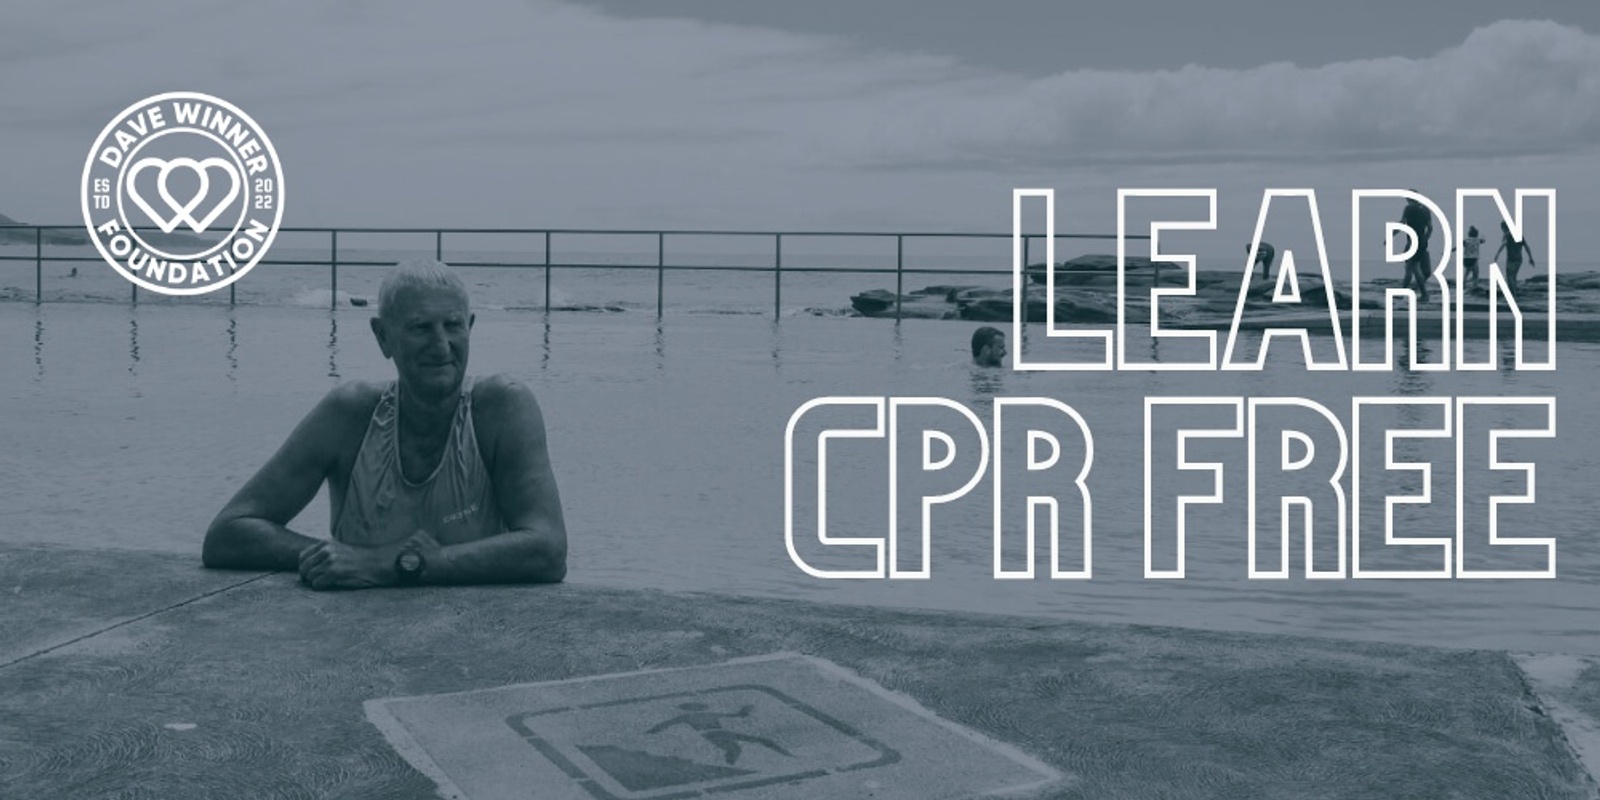 Banner image for Winner Foundation: Free CPR Training #15